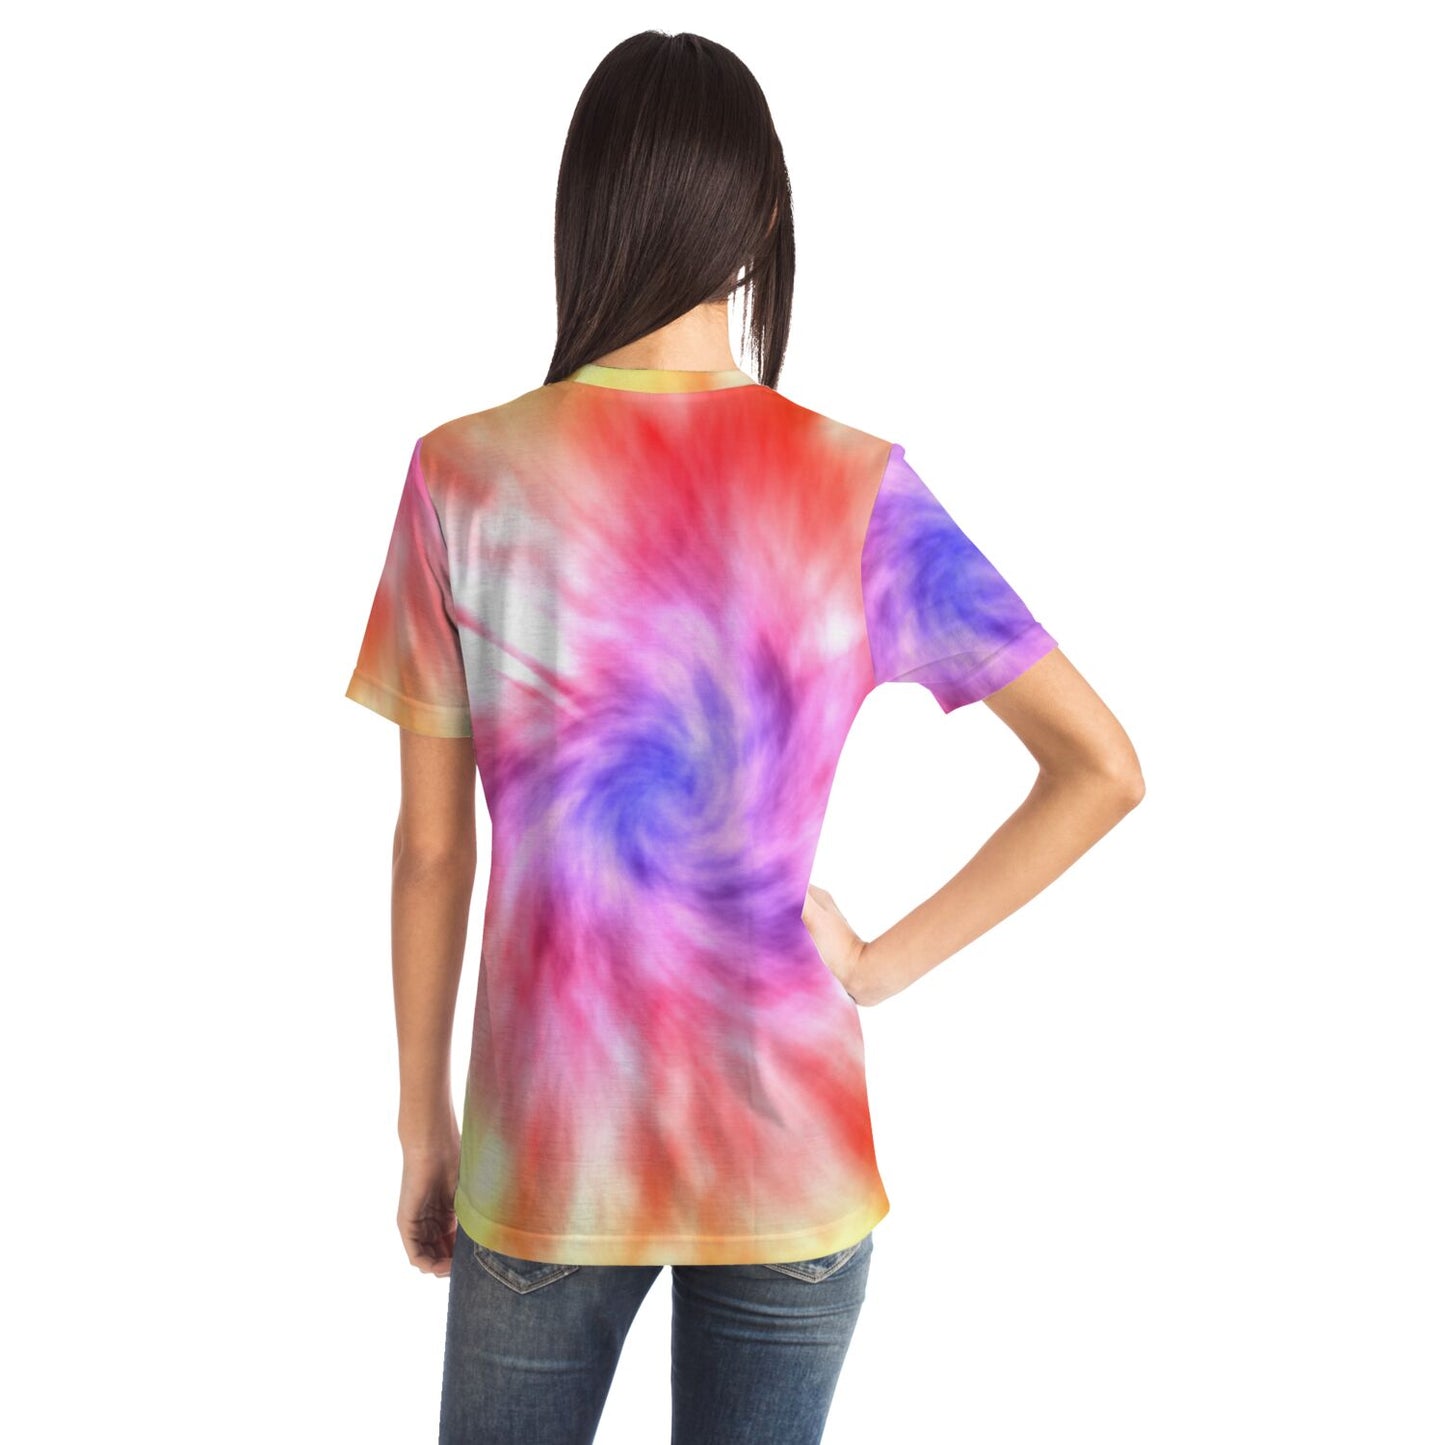 Tie Dyes - Yellow and Oranges (New River Gorge)